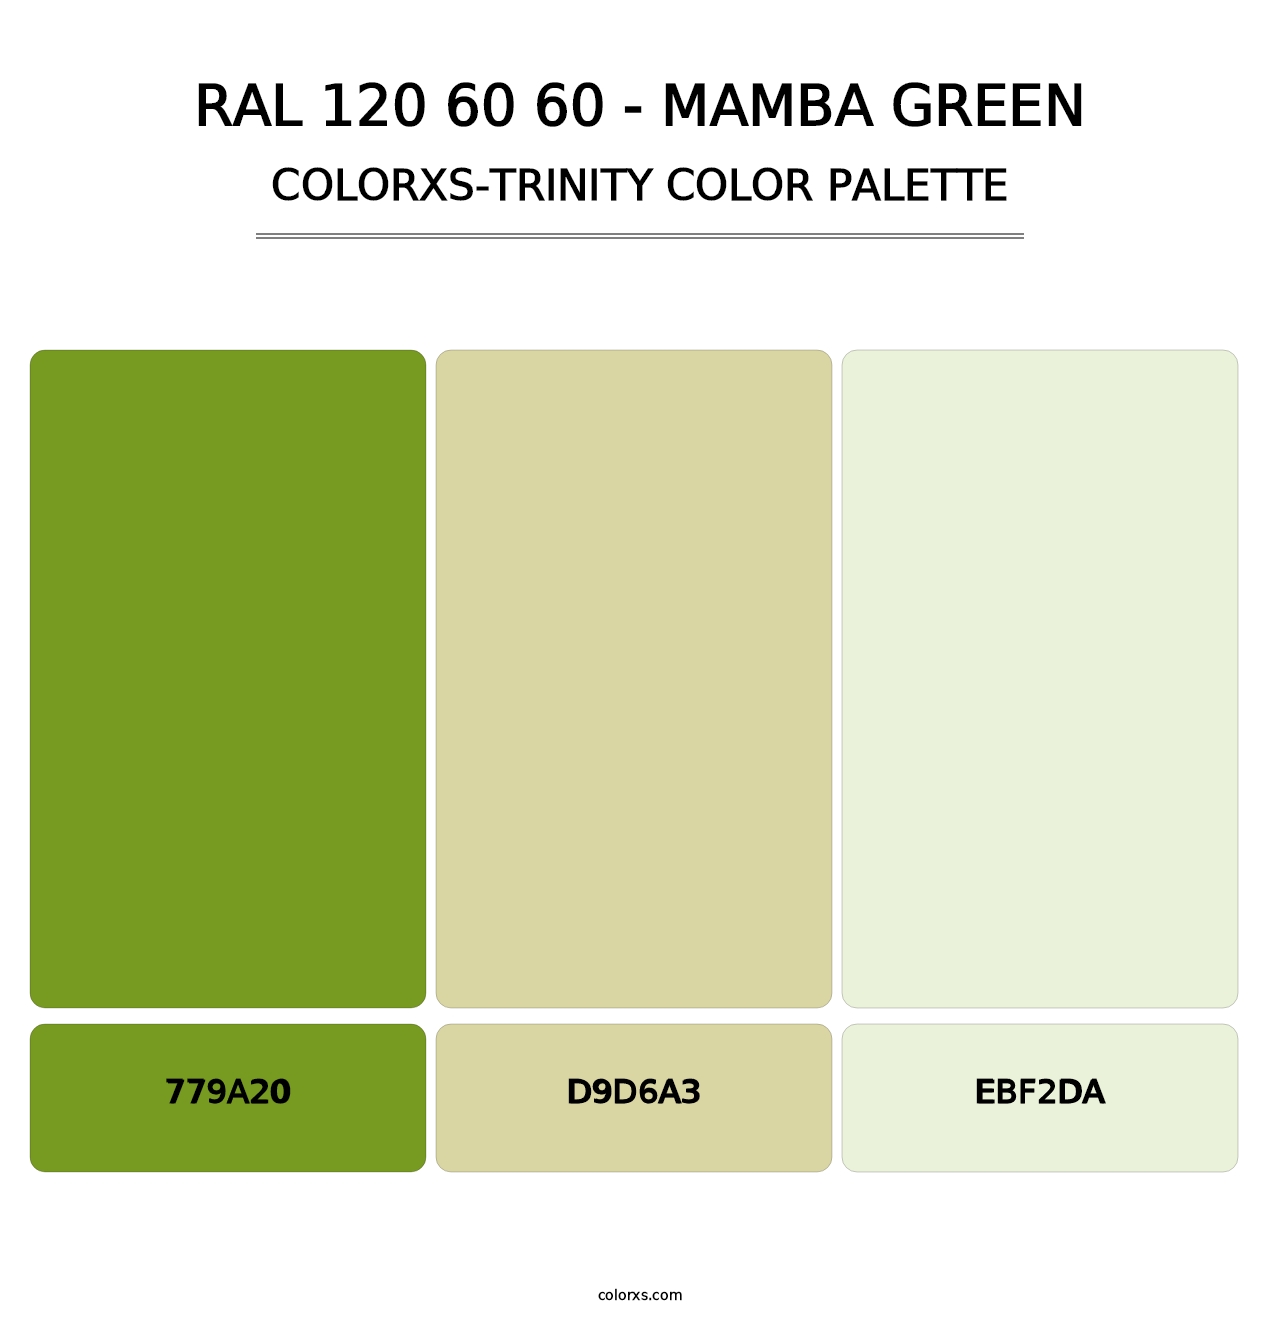 RAL 120 60 60 - Mamba Green - Colorxs Trinity Palette